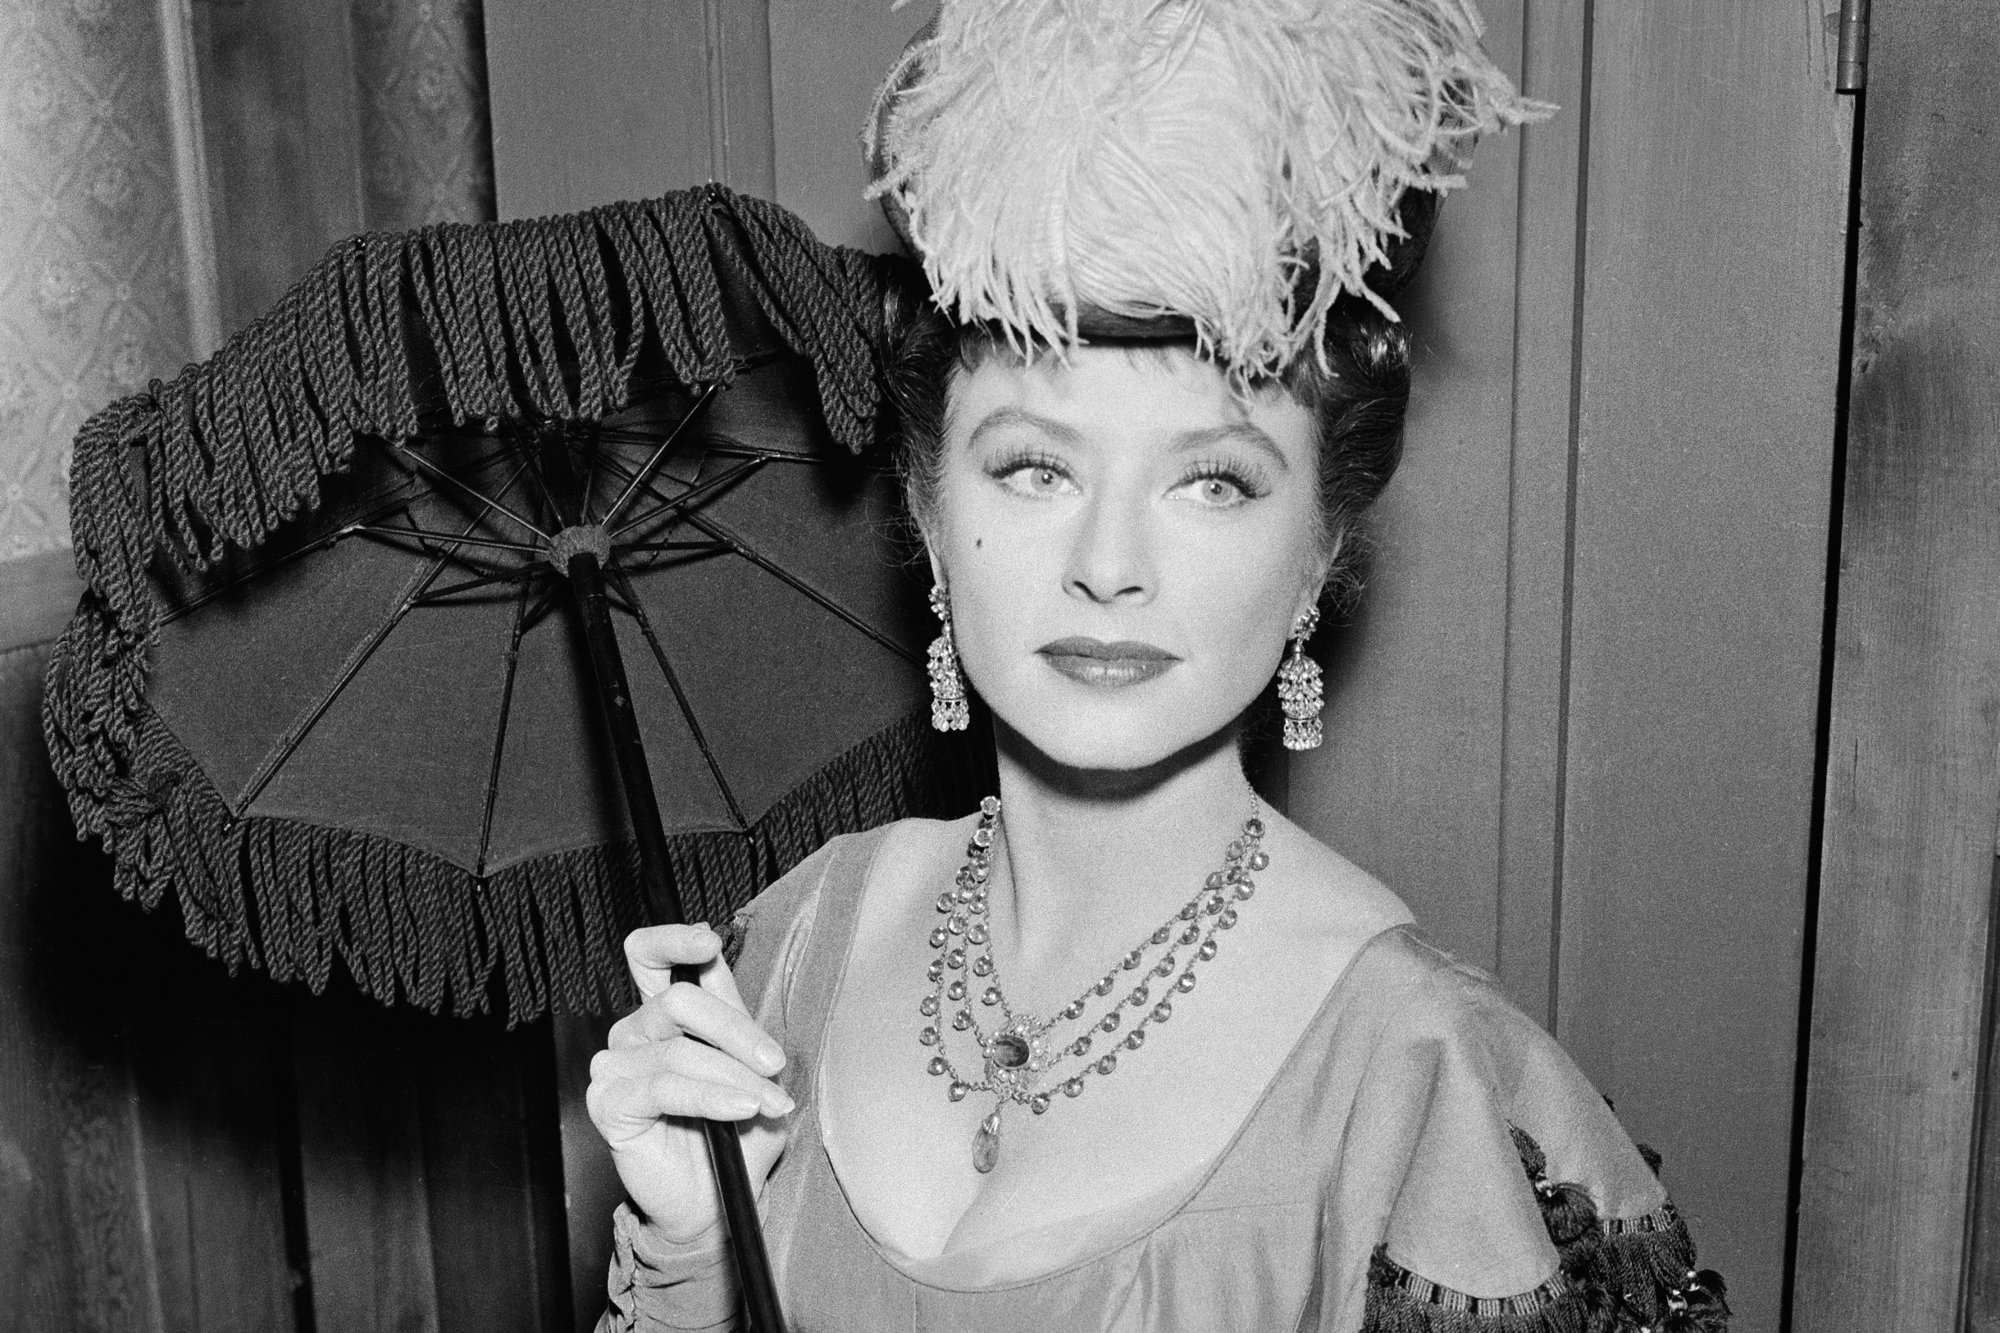 'Gunsmoke' Amanda Blake as Miss Kitty Russell in a black-and-white picture holding an umbrella